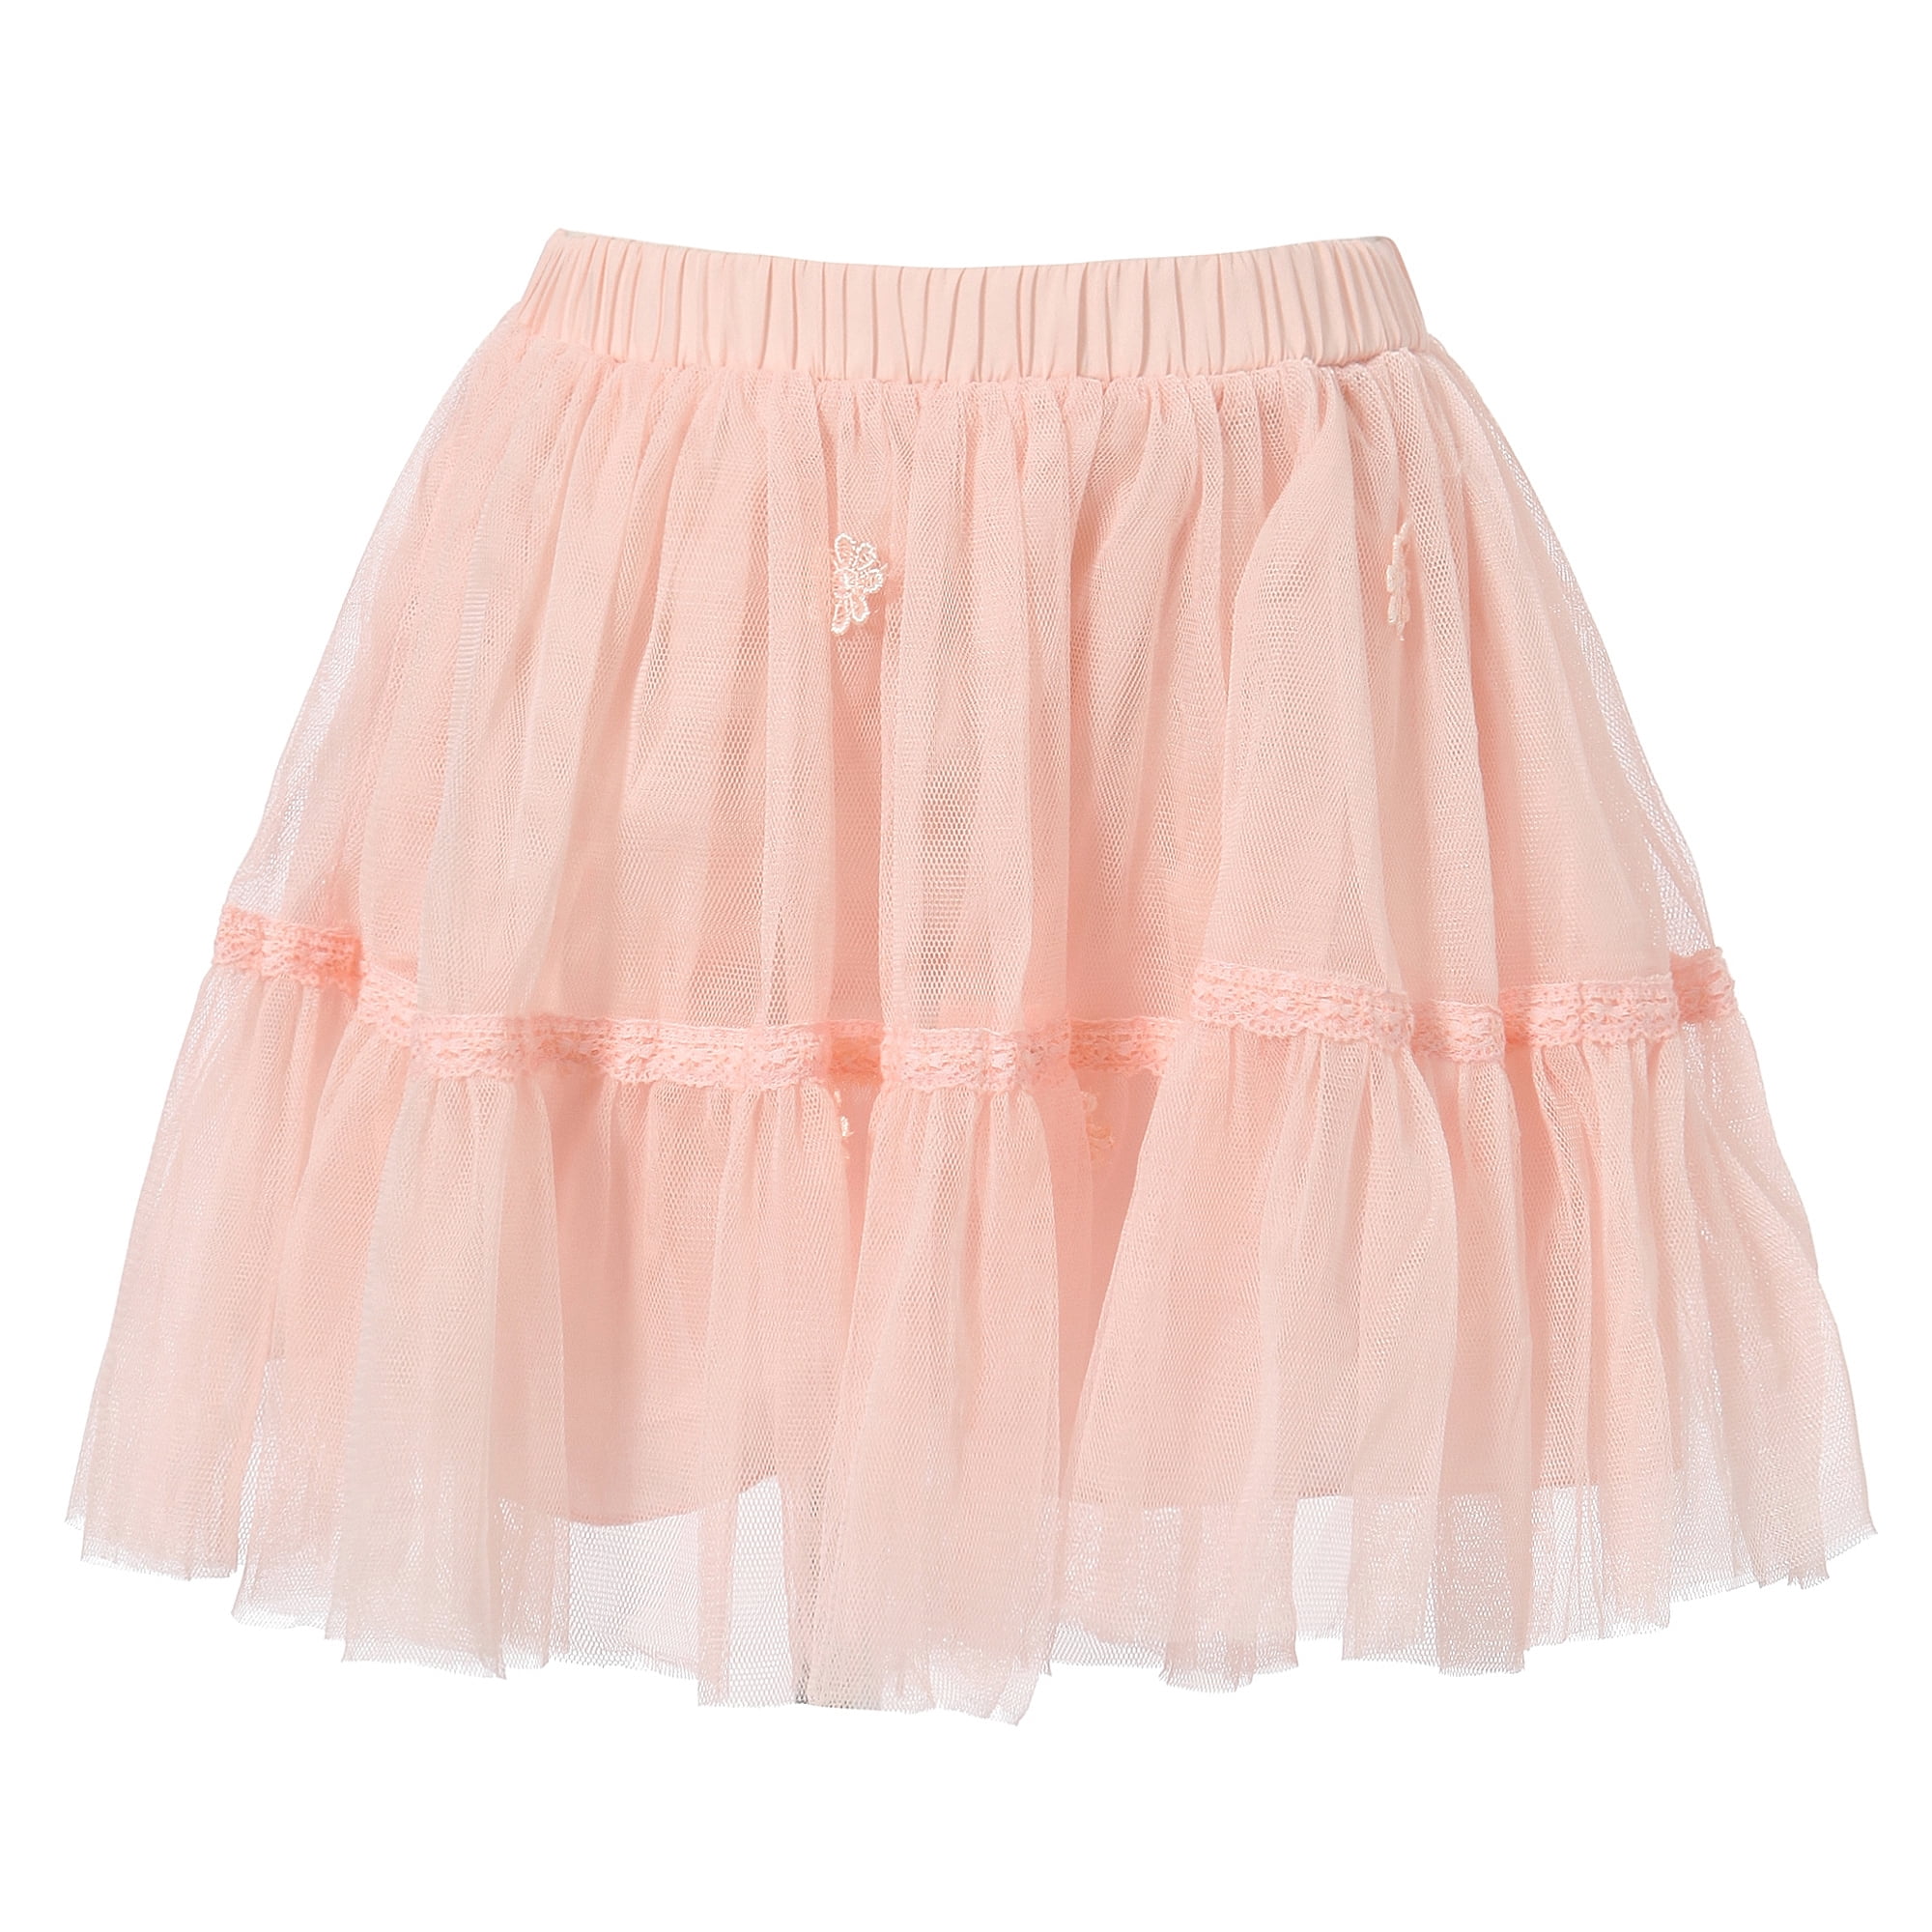 Richie House - Richie House Girls' Sweet Skirts with Layered Bottom ...